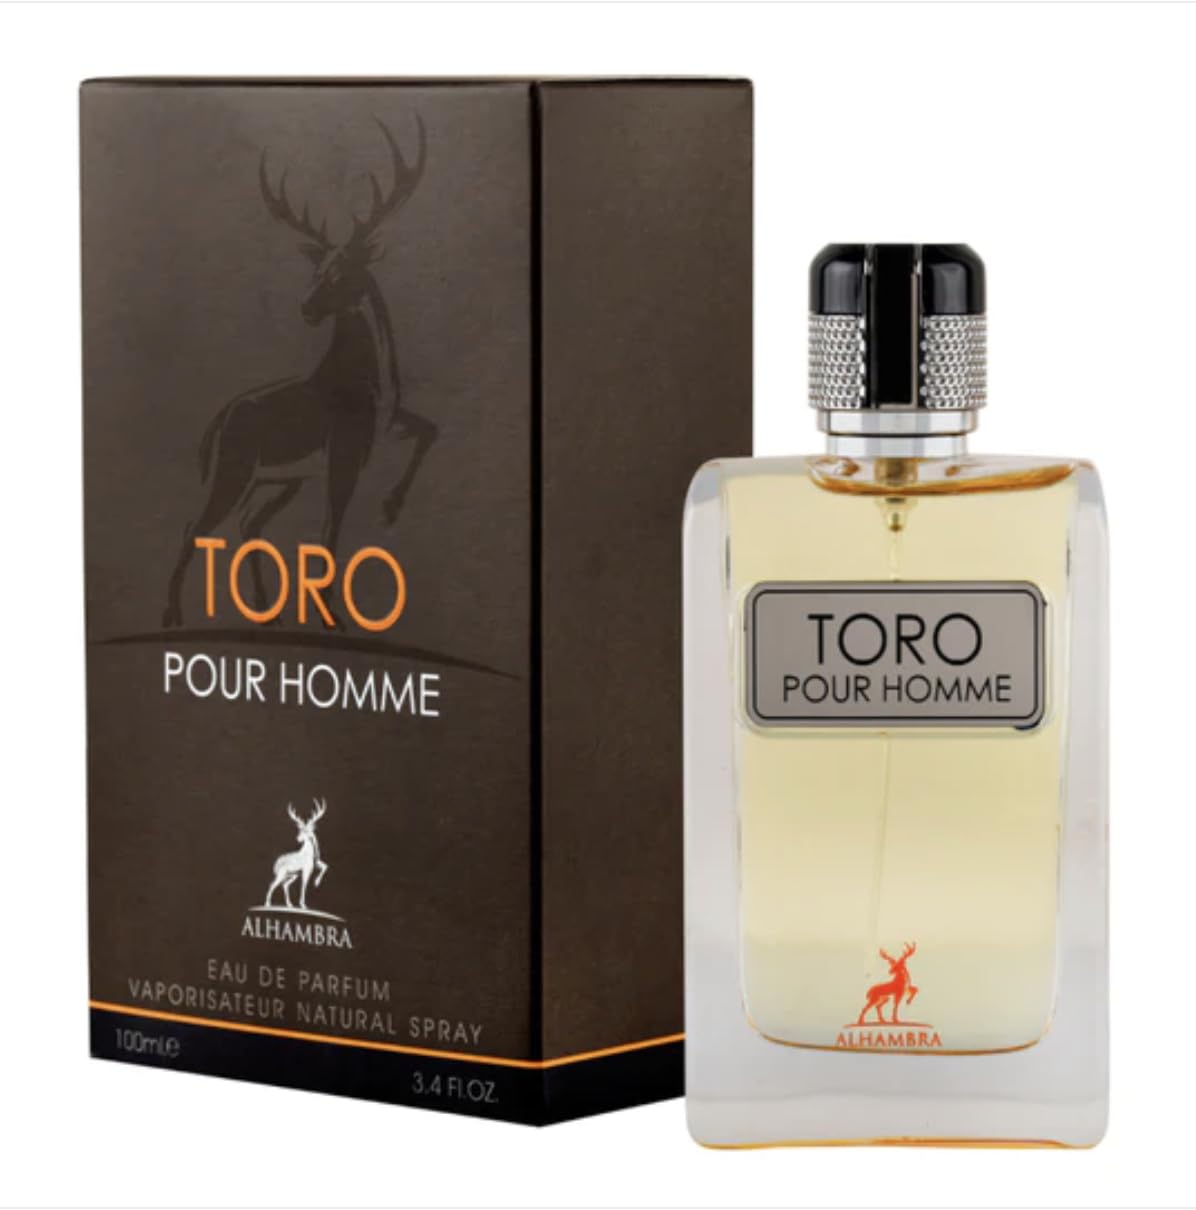 ALHAMBRA TORO PURE HOMME EAU DE PARFUM 100ml | LUXURY LONG LASTING FRAGRANCE | PREMIUM IMPORTED FRAGRANCE SCENT FOR MEN AND WOMEN | PERFUME GIFT SET | ALL OCCASION (Pack of 1)